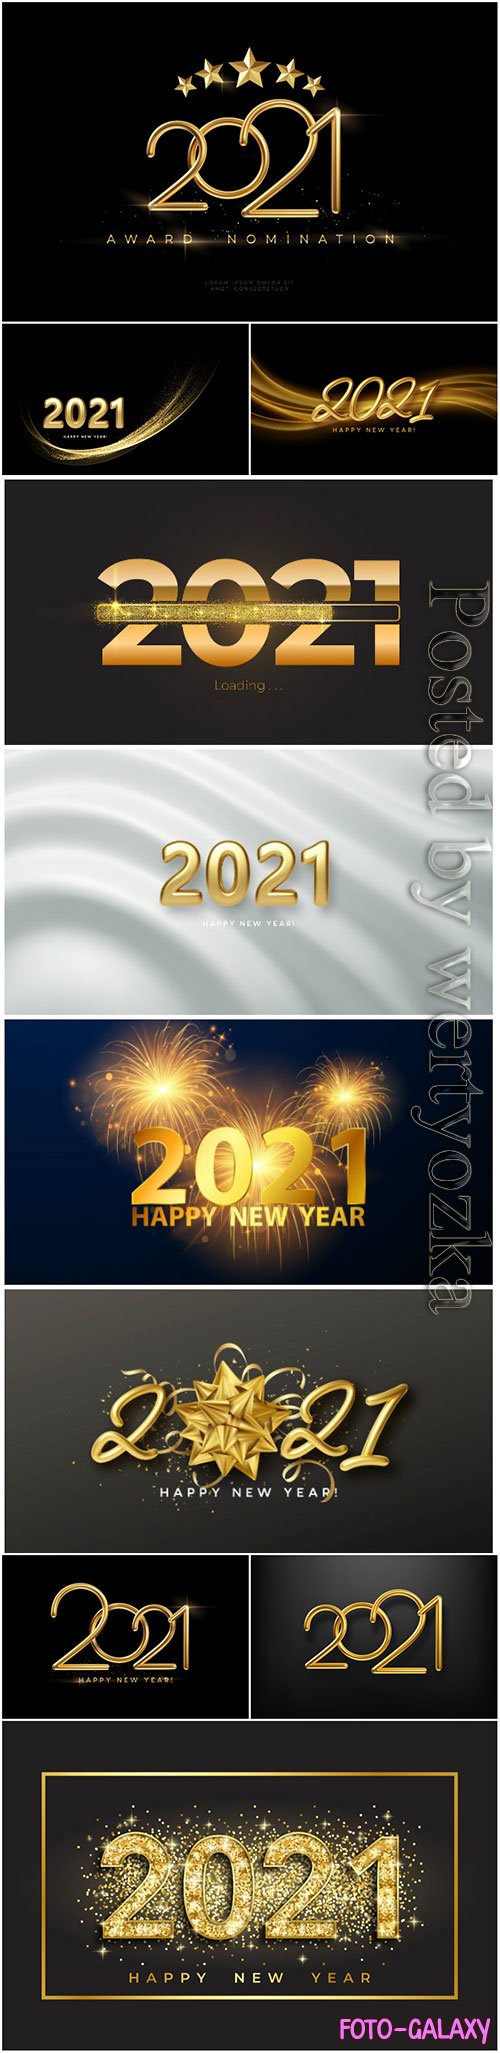 New Year 2021 realistic golden 3d inscription on the background